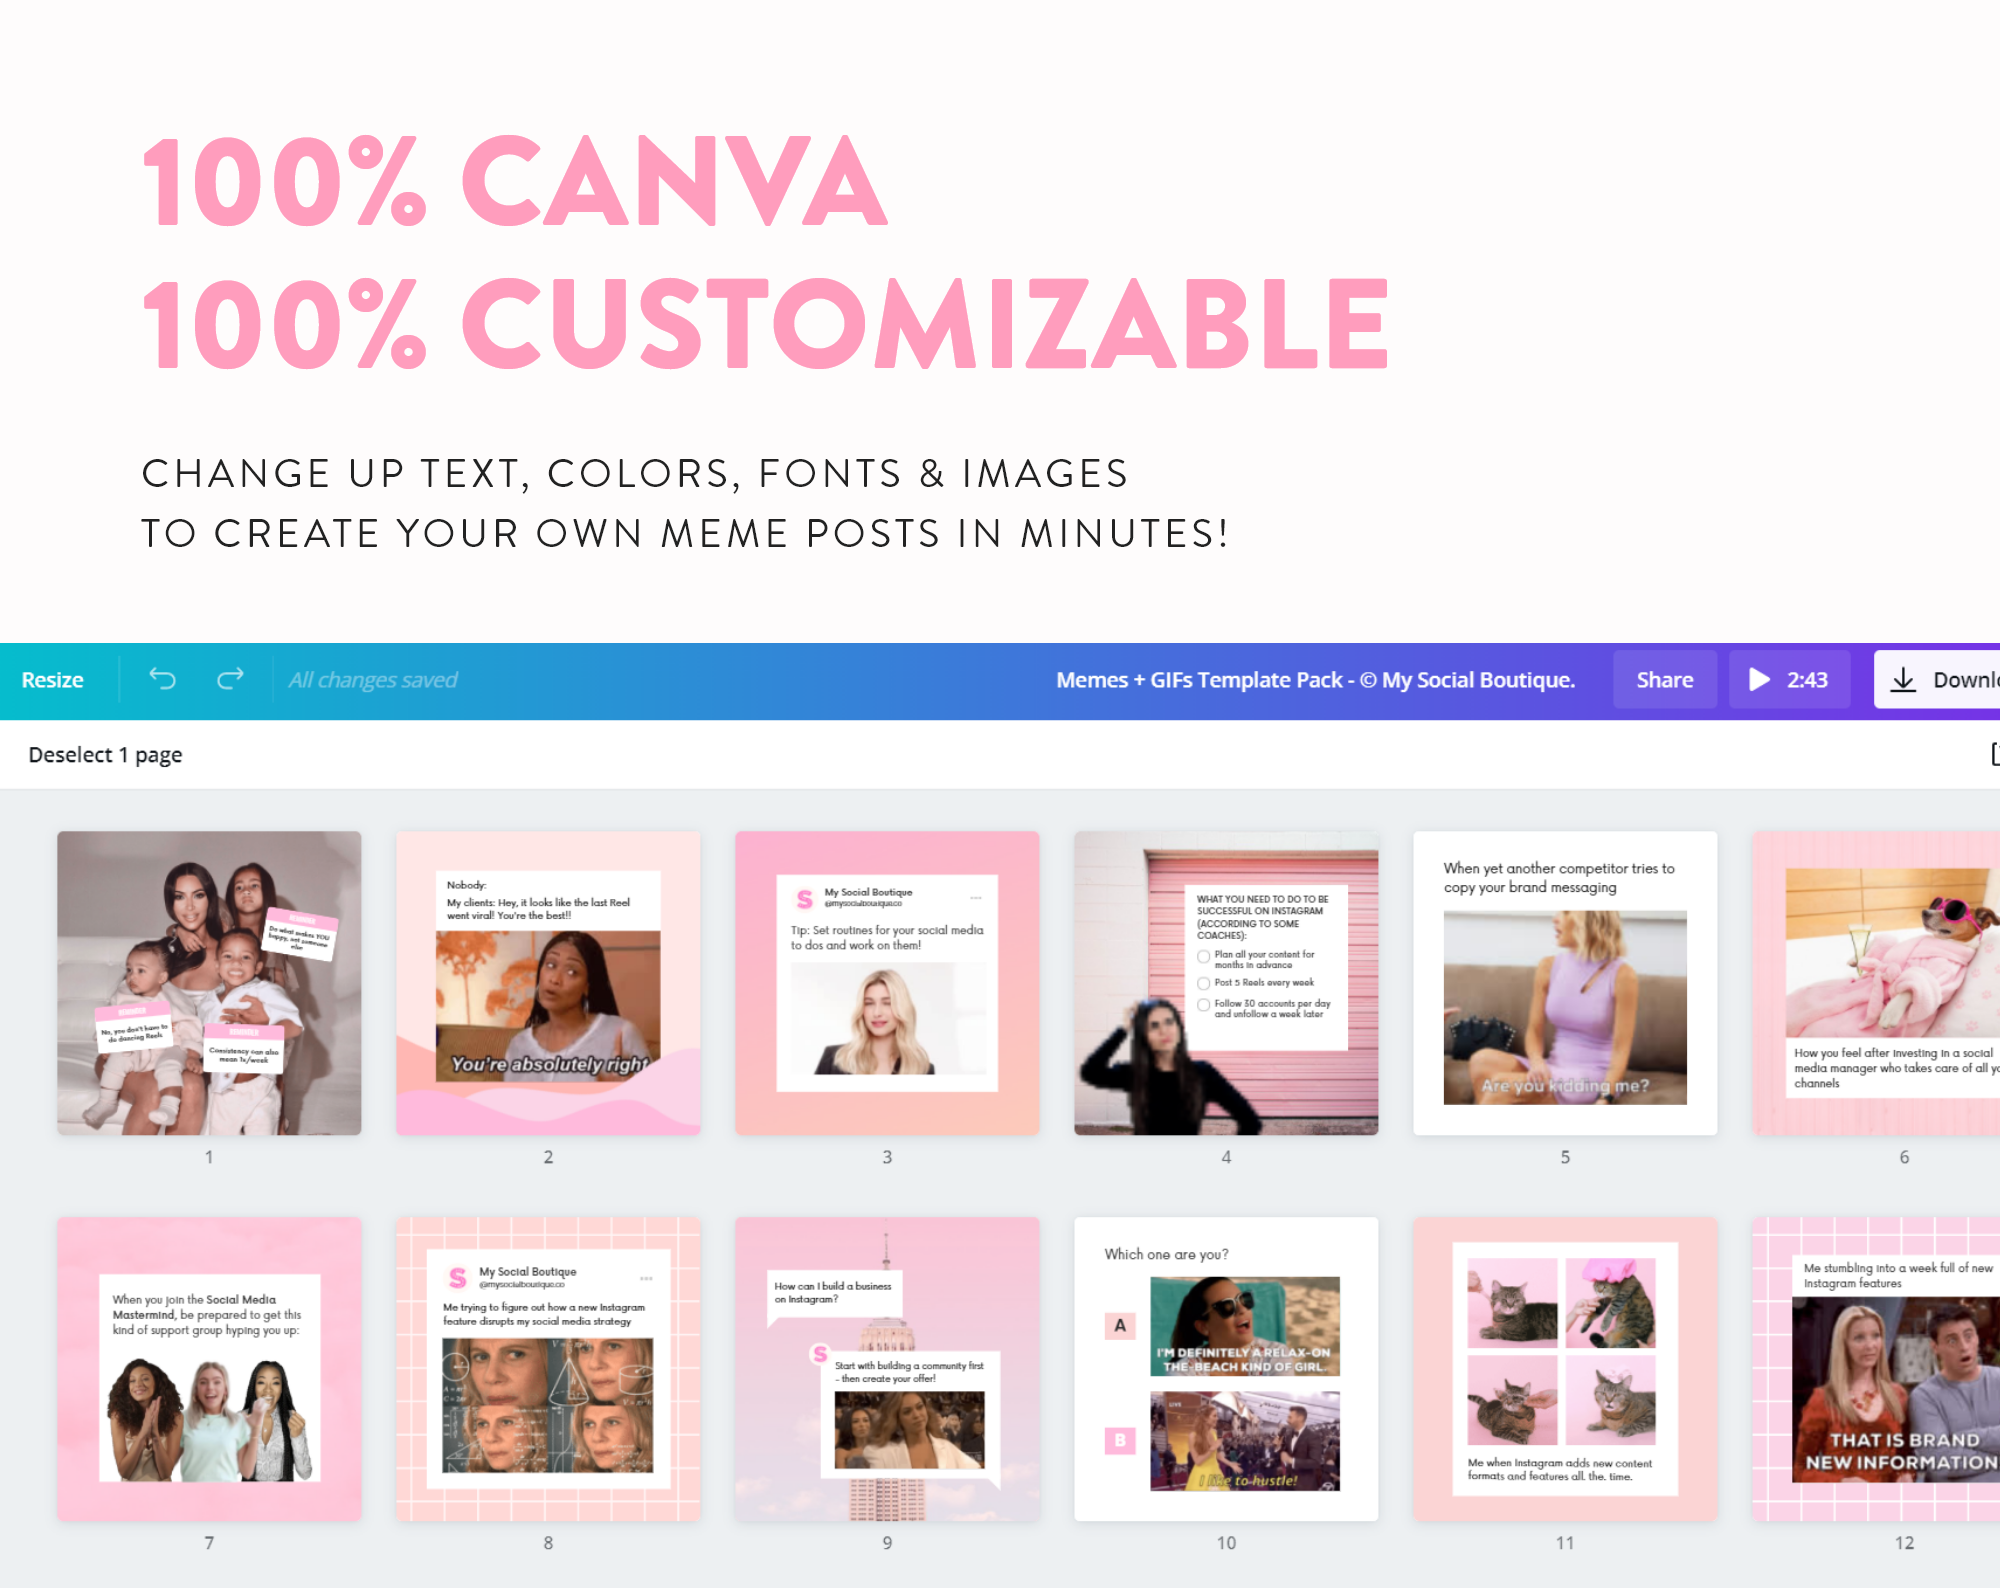 memes-gifs-Instagram-feed-post-templates-canva-customizable-6